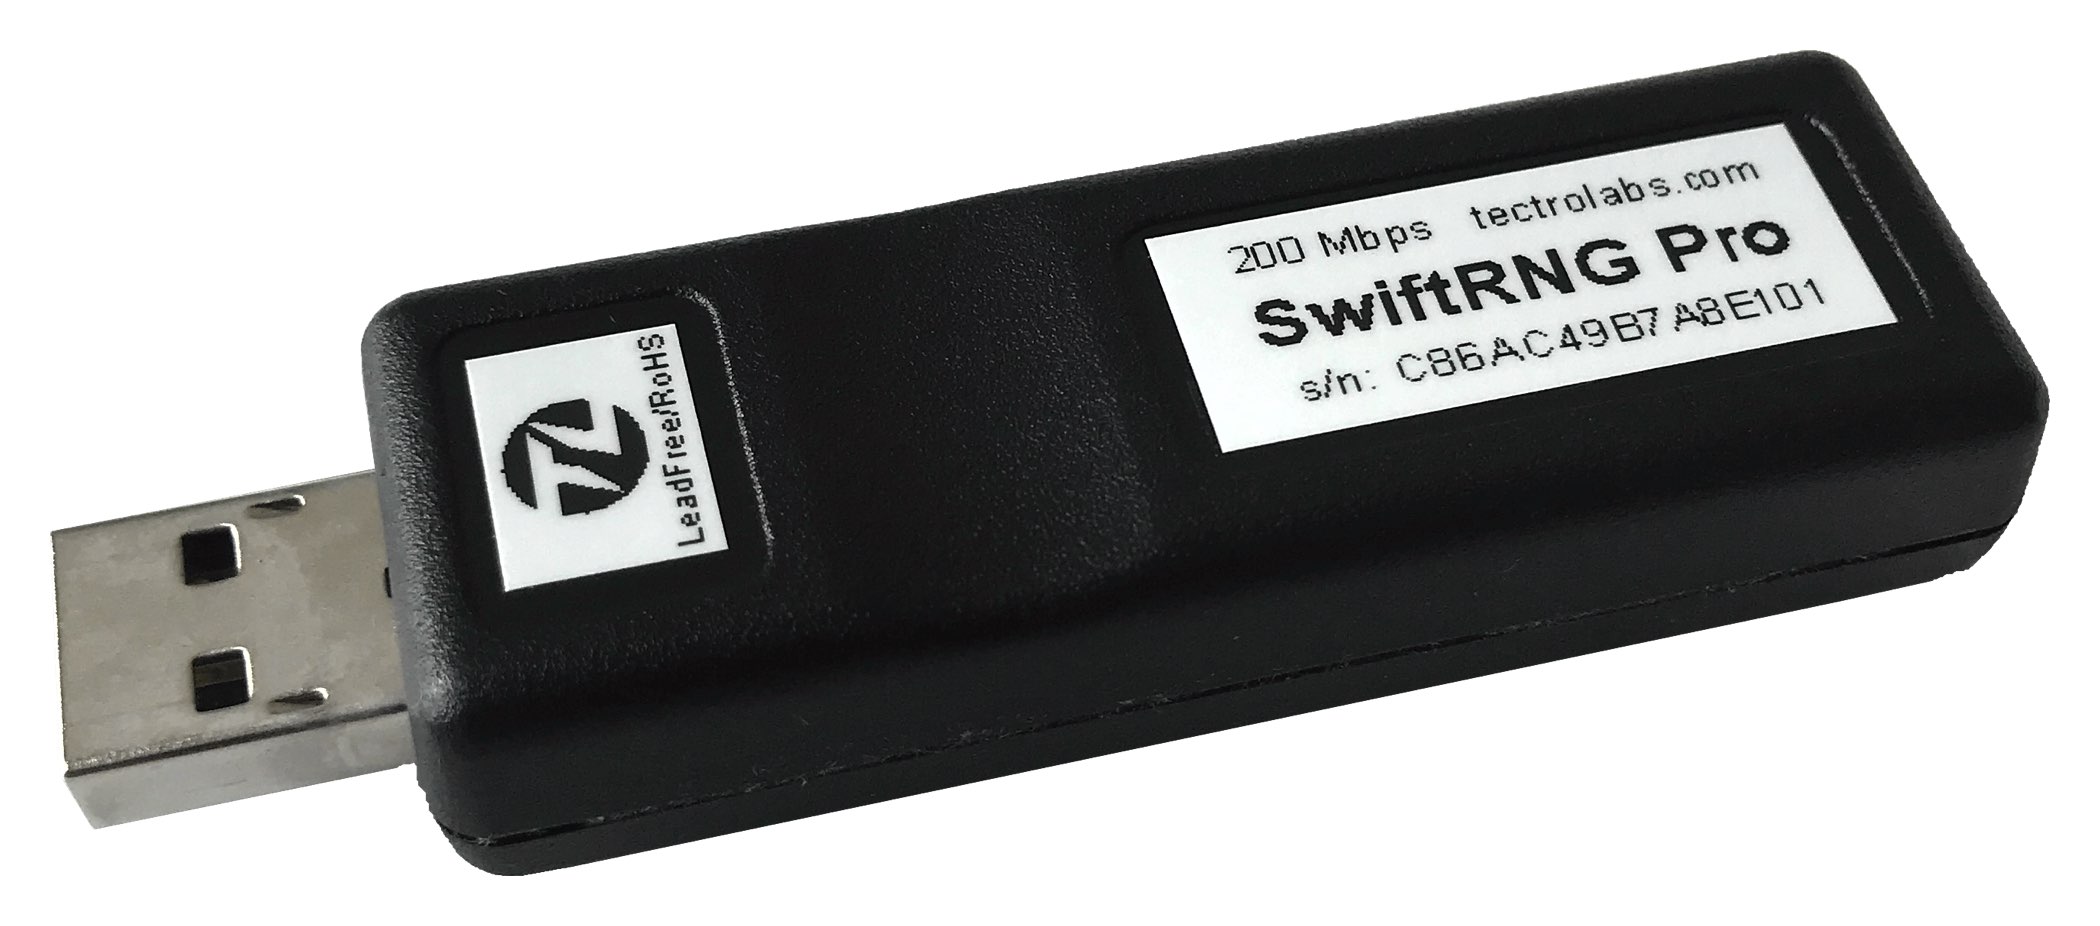 A SwiftRNG Pro